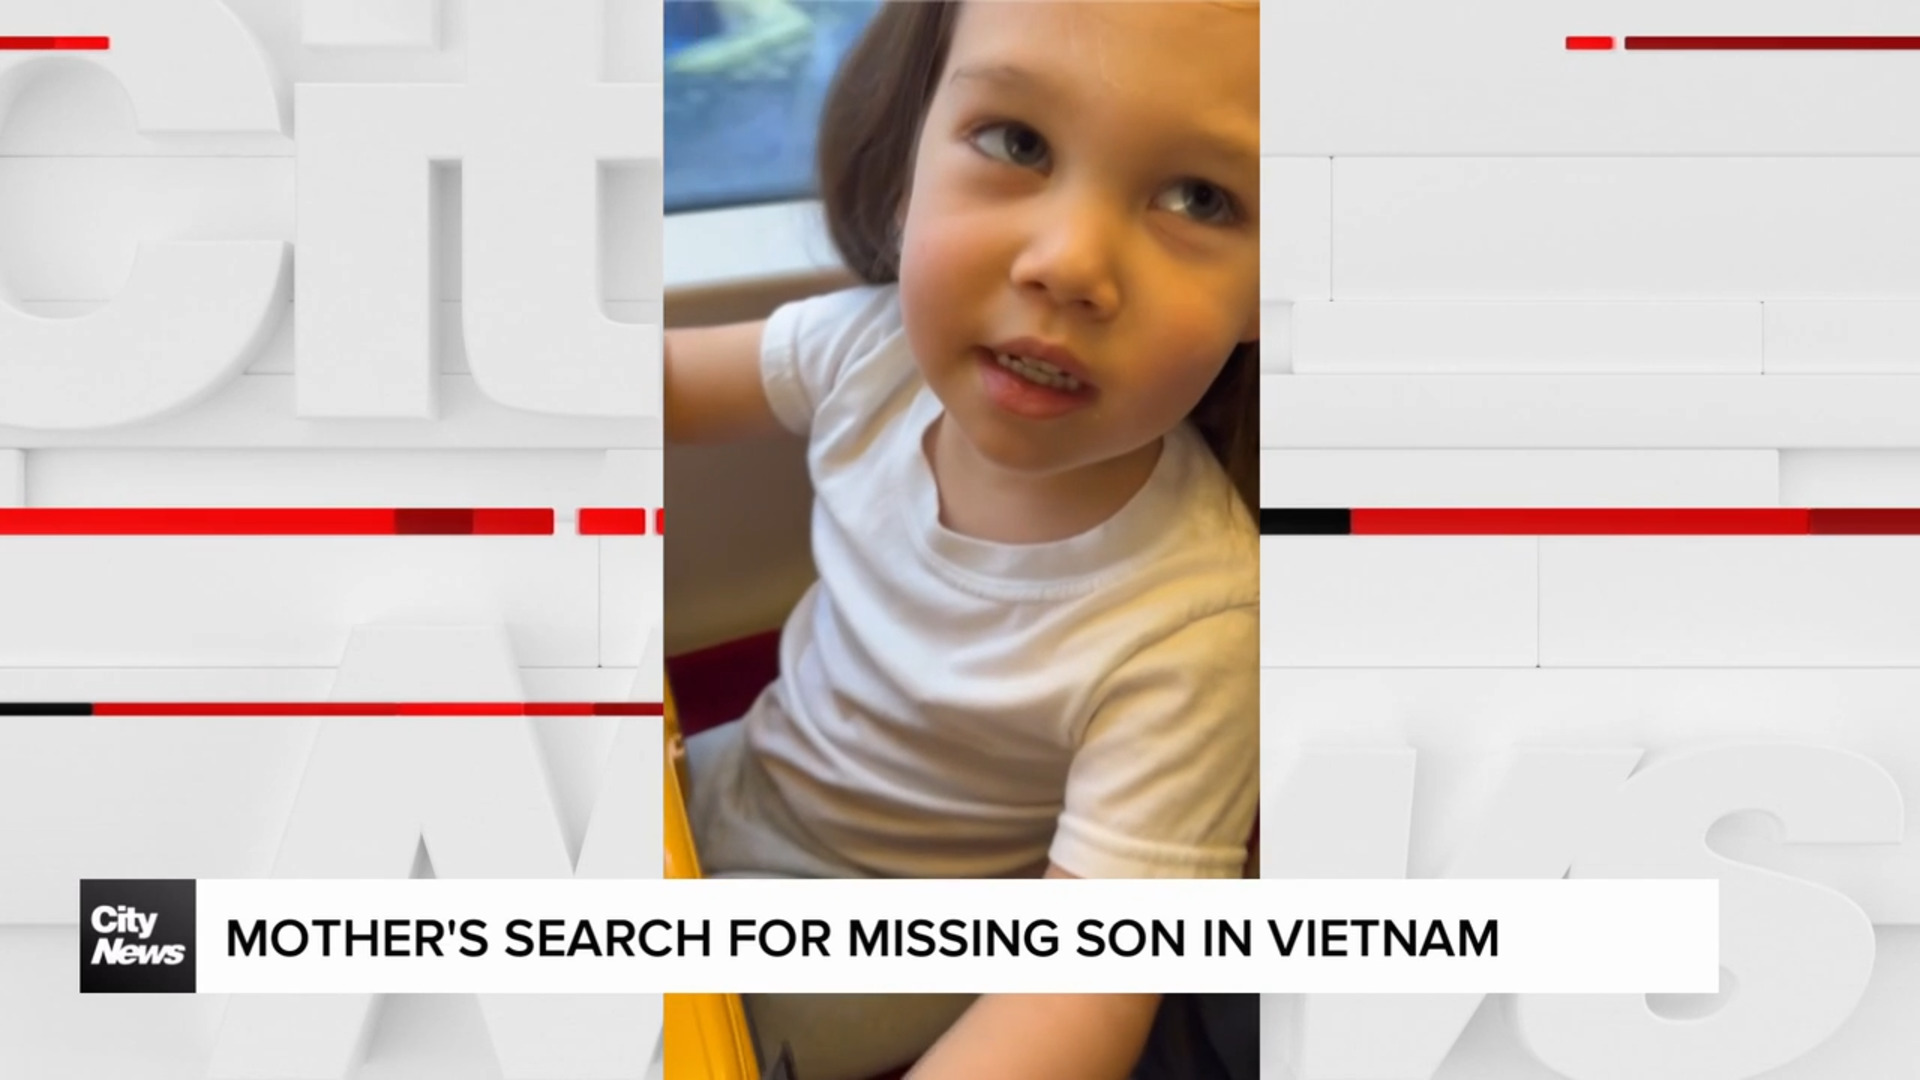 Mother's search for missing son in Vietnam